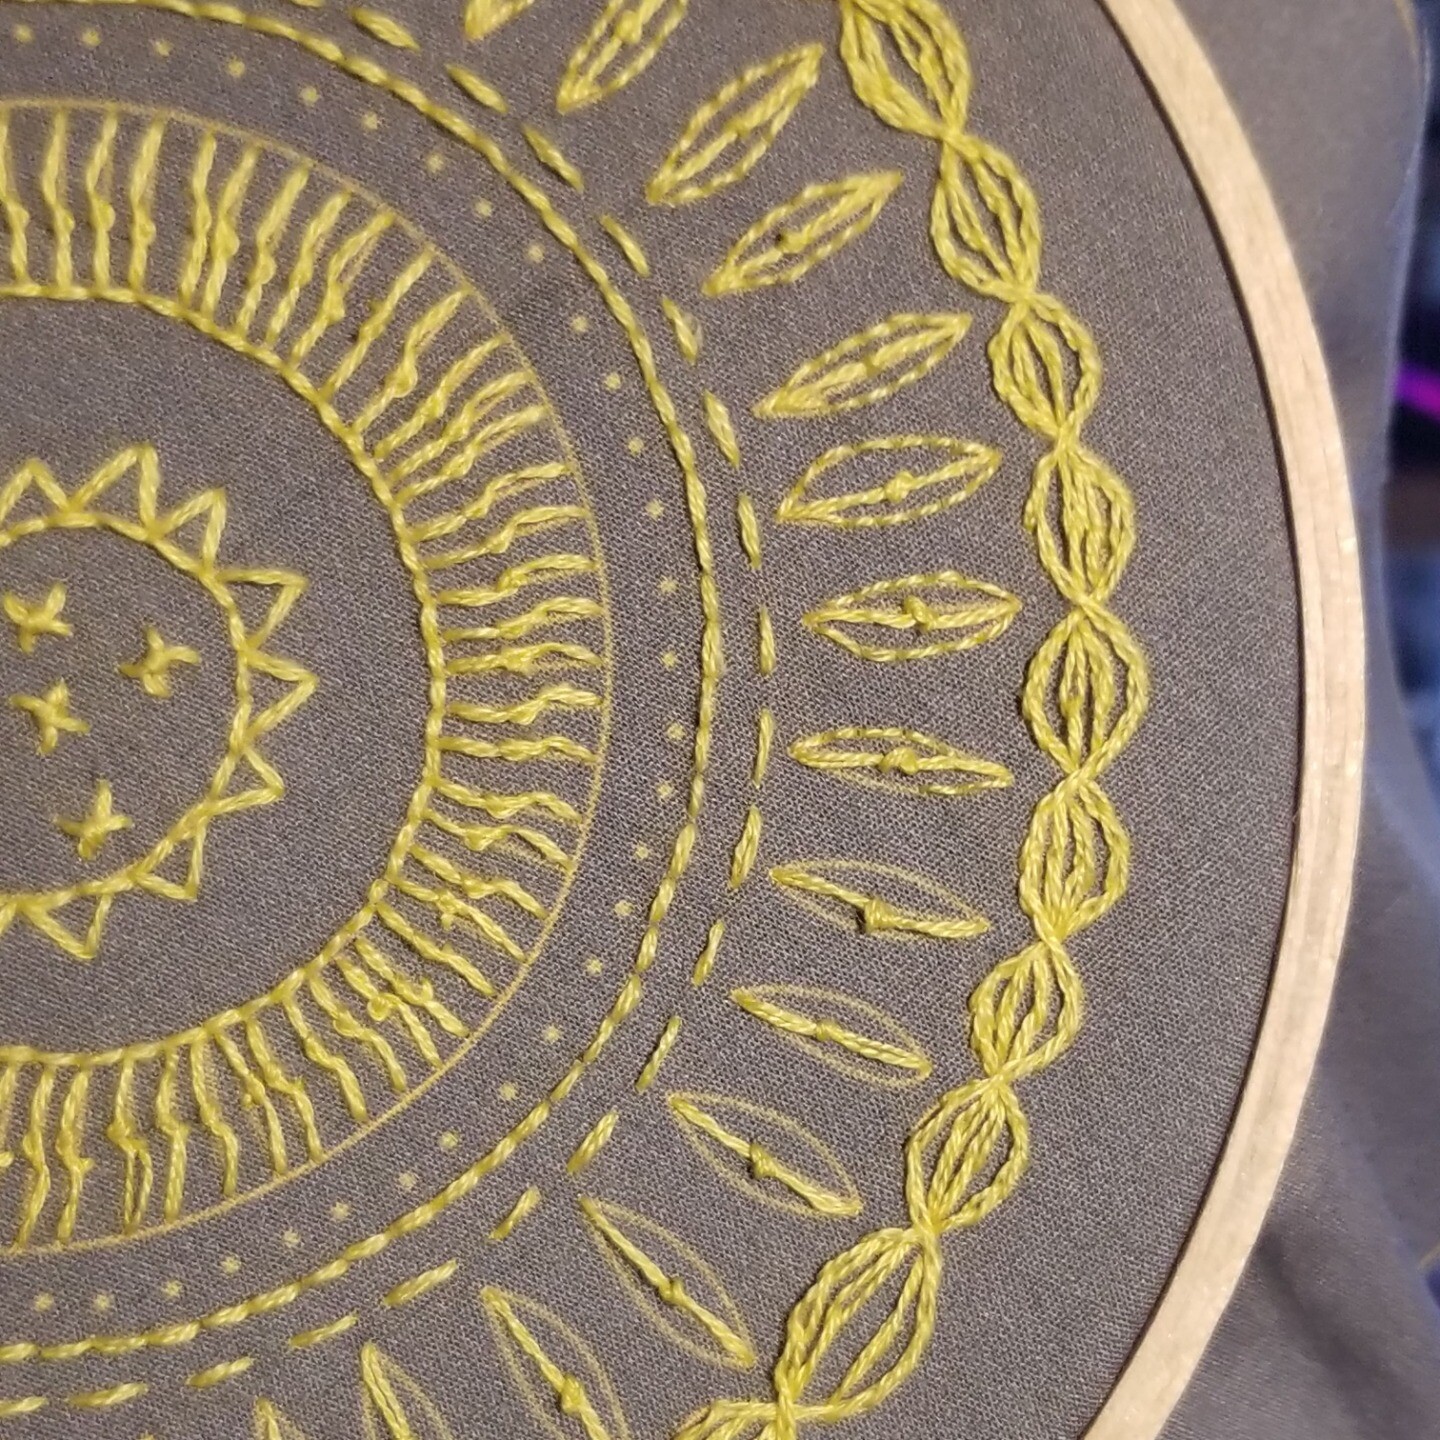 Almost completed embroidery of a sunflower mandala in yellow thread on a grey background.